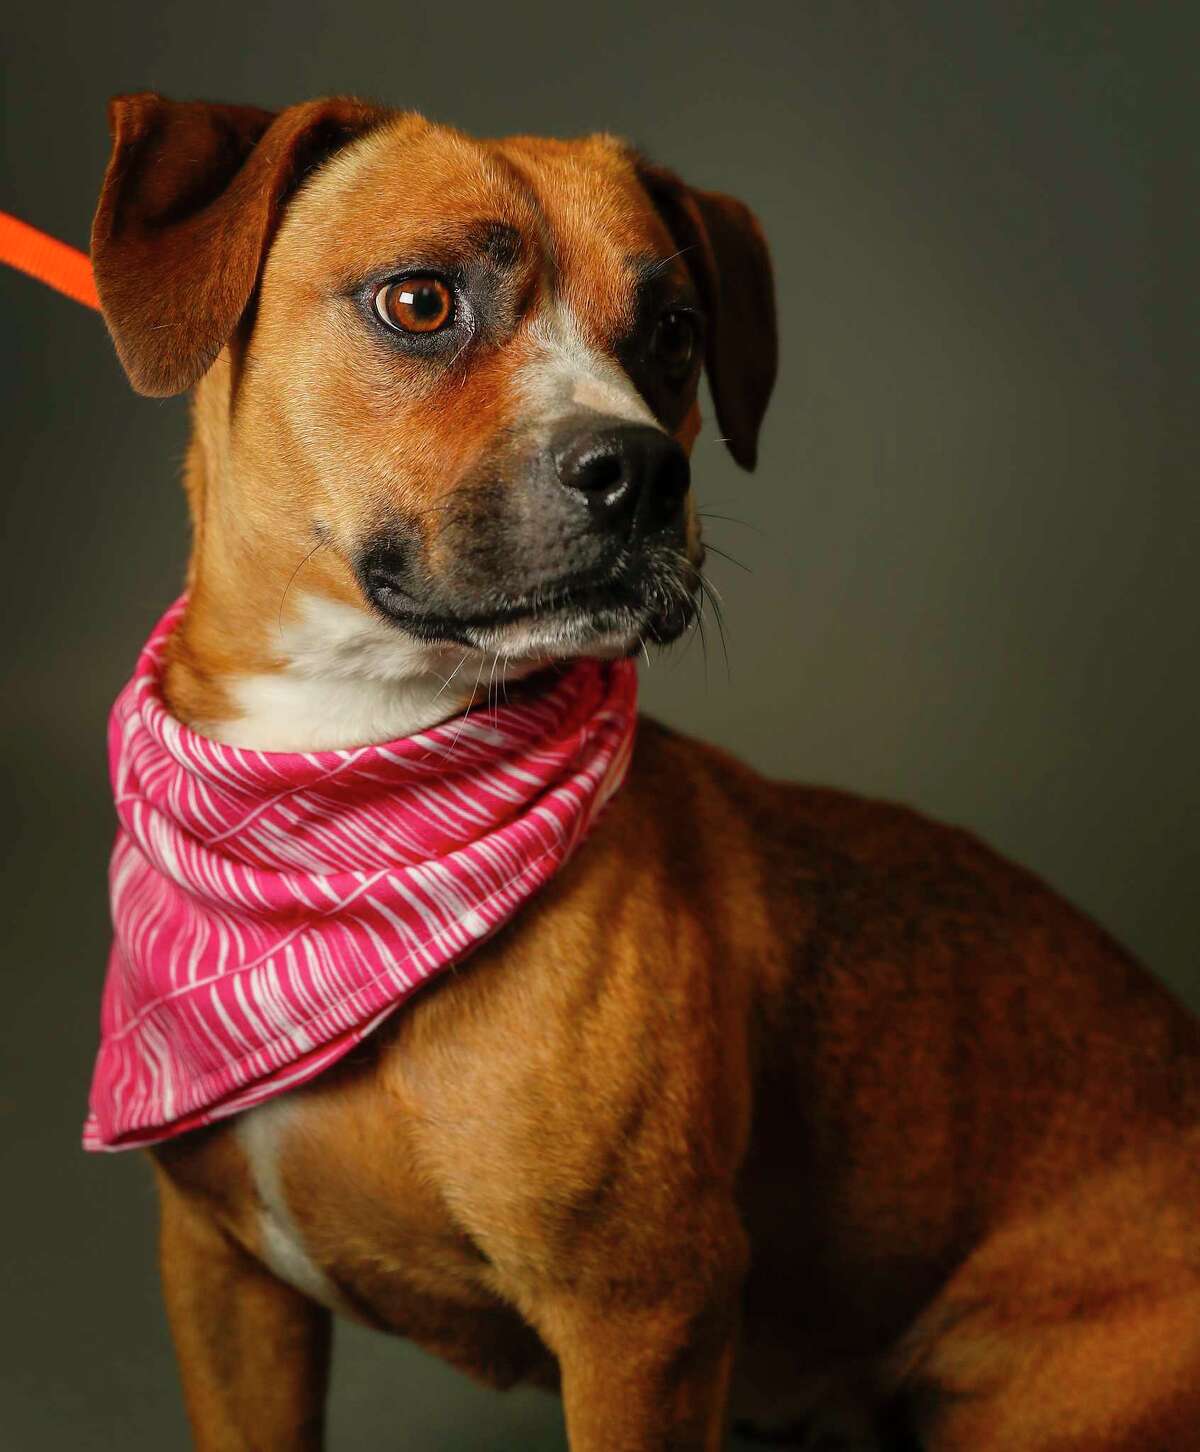 Sassy is a 2-year-old, female, Basset Hound/Pit Bull mix available for adoption at the Harris County Animal Shelter, in Houston. (Animal ID: A534189) Photographed Tuesday June 4, 2019. Sassy is a friendly dog, who loves treats and attention.